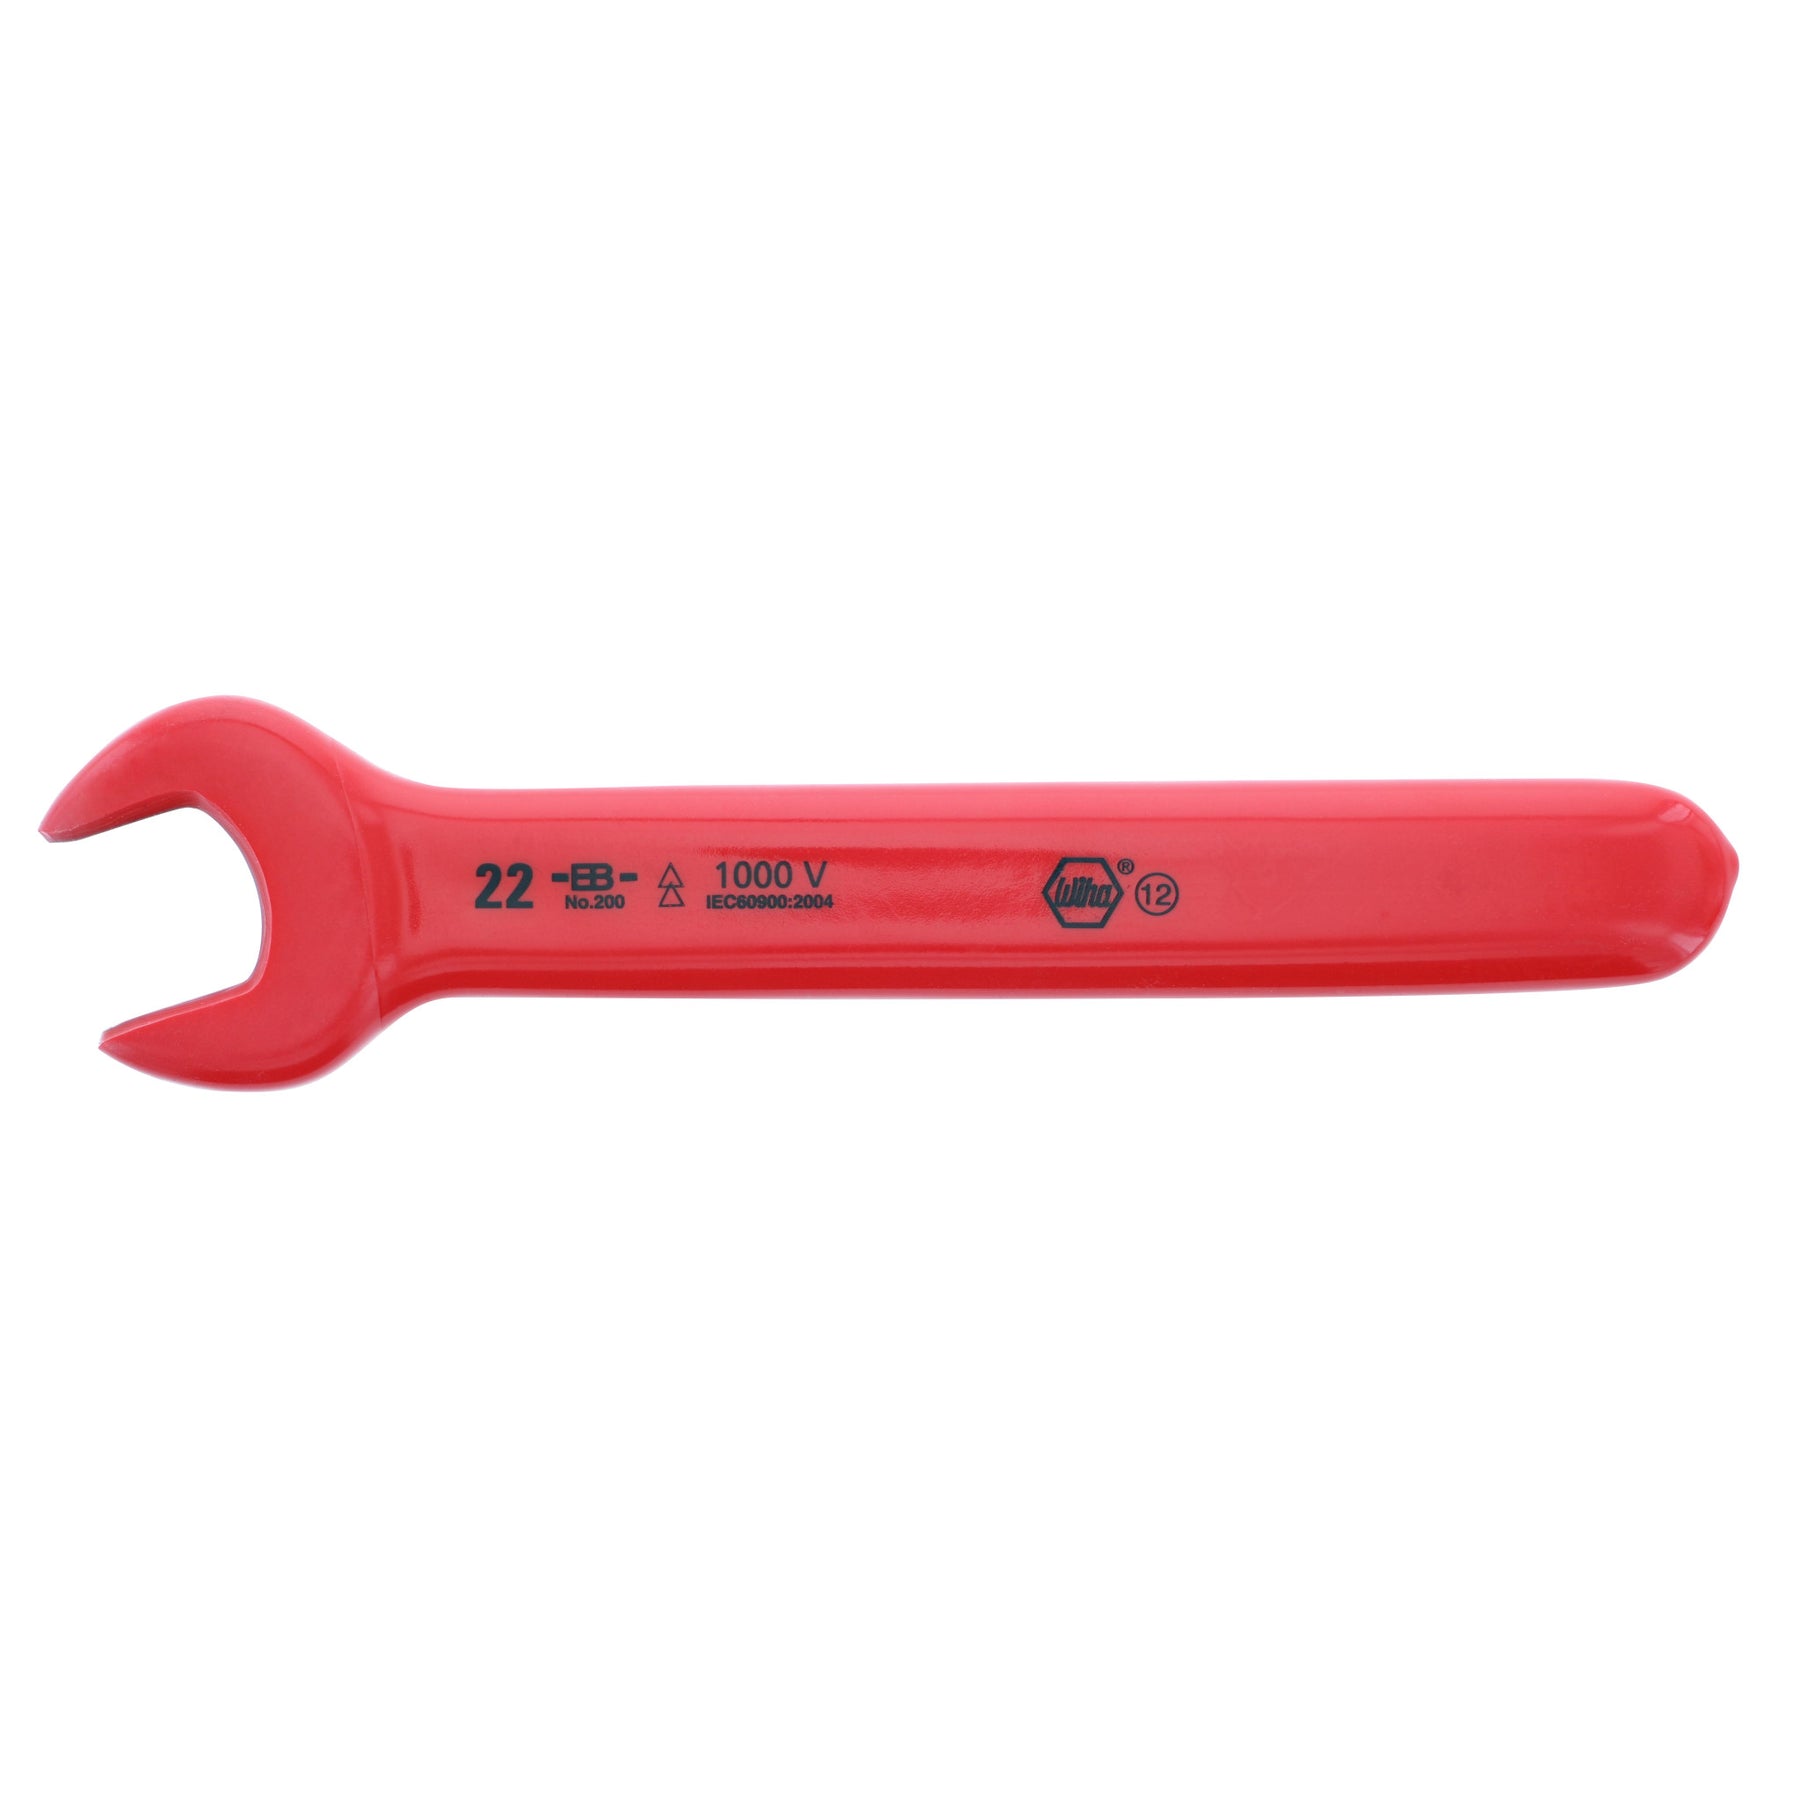 Wiha 20022 Insulated Open End Wrench 22.0mm